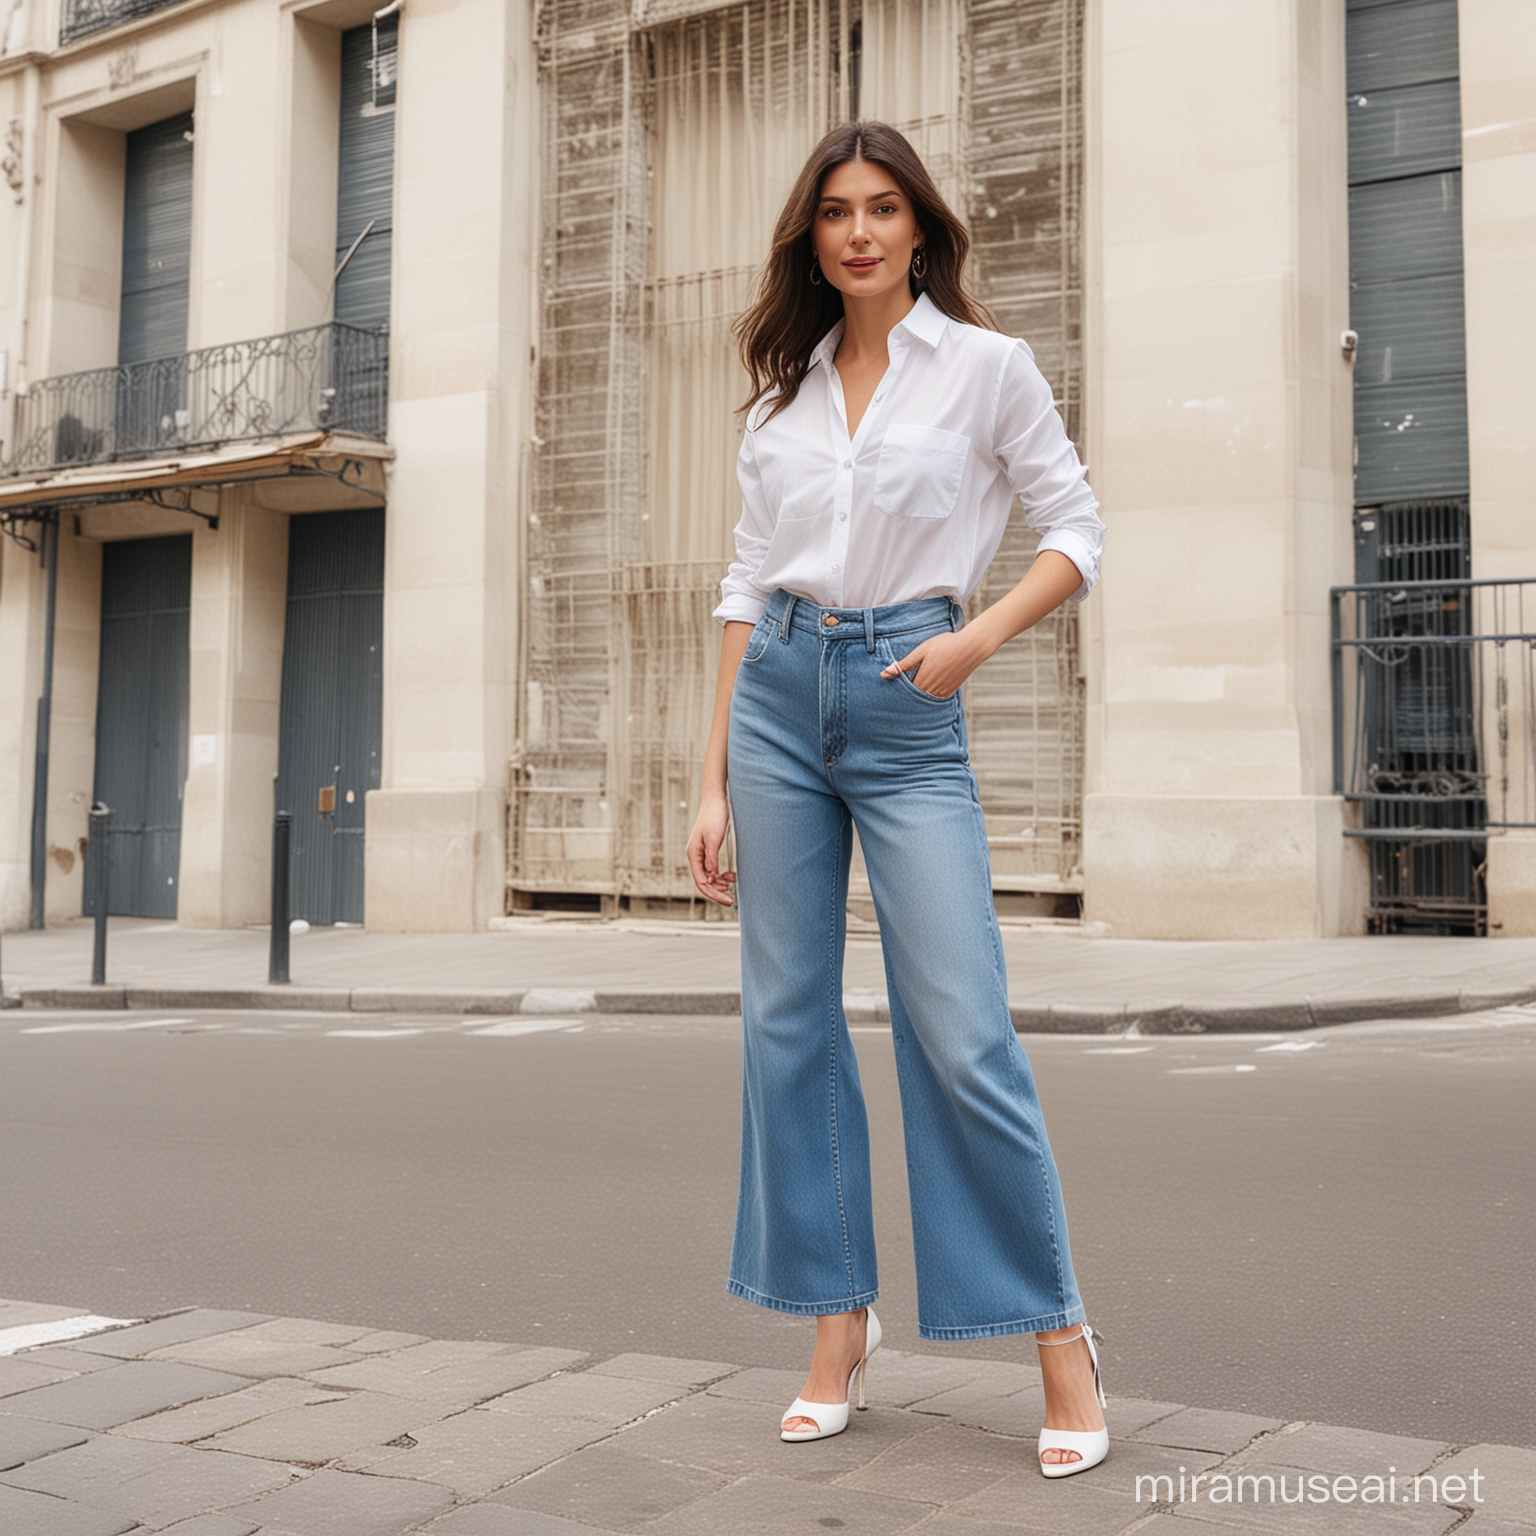 Stylish Woman in White Shirt and Wide Leg Jeans with Parisian Backdrop